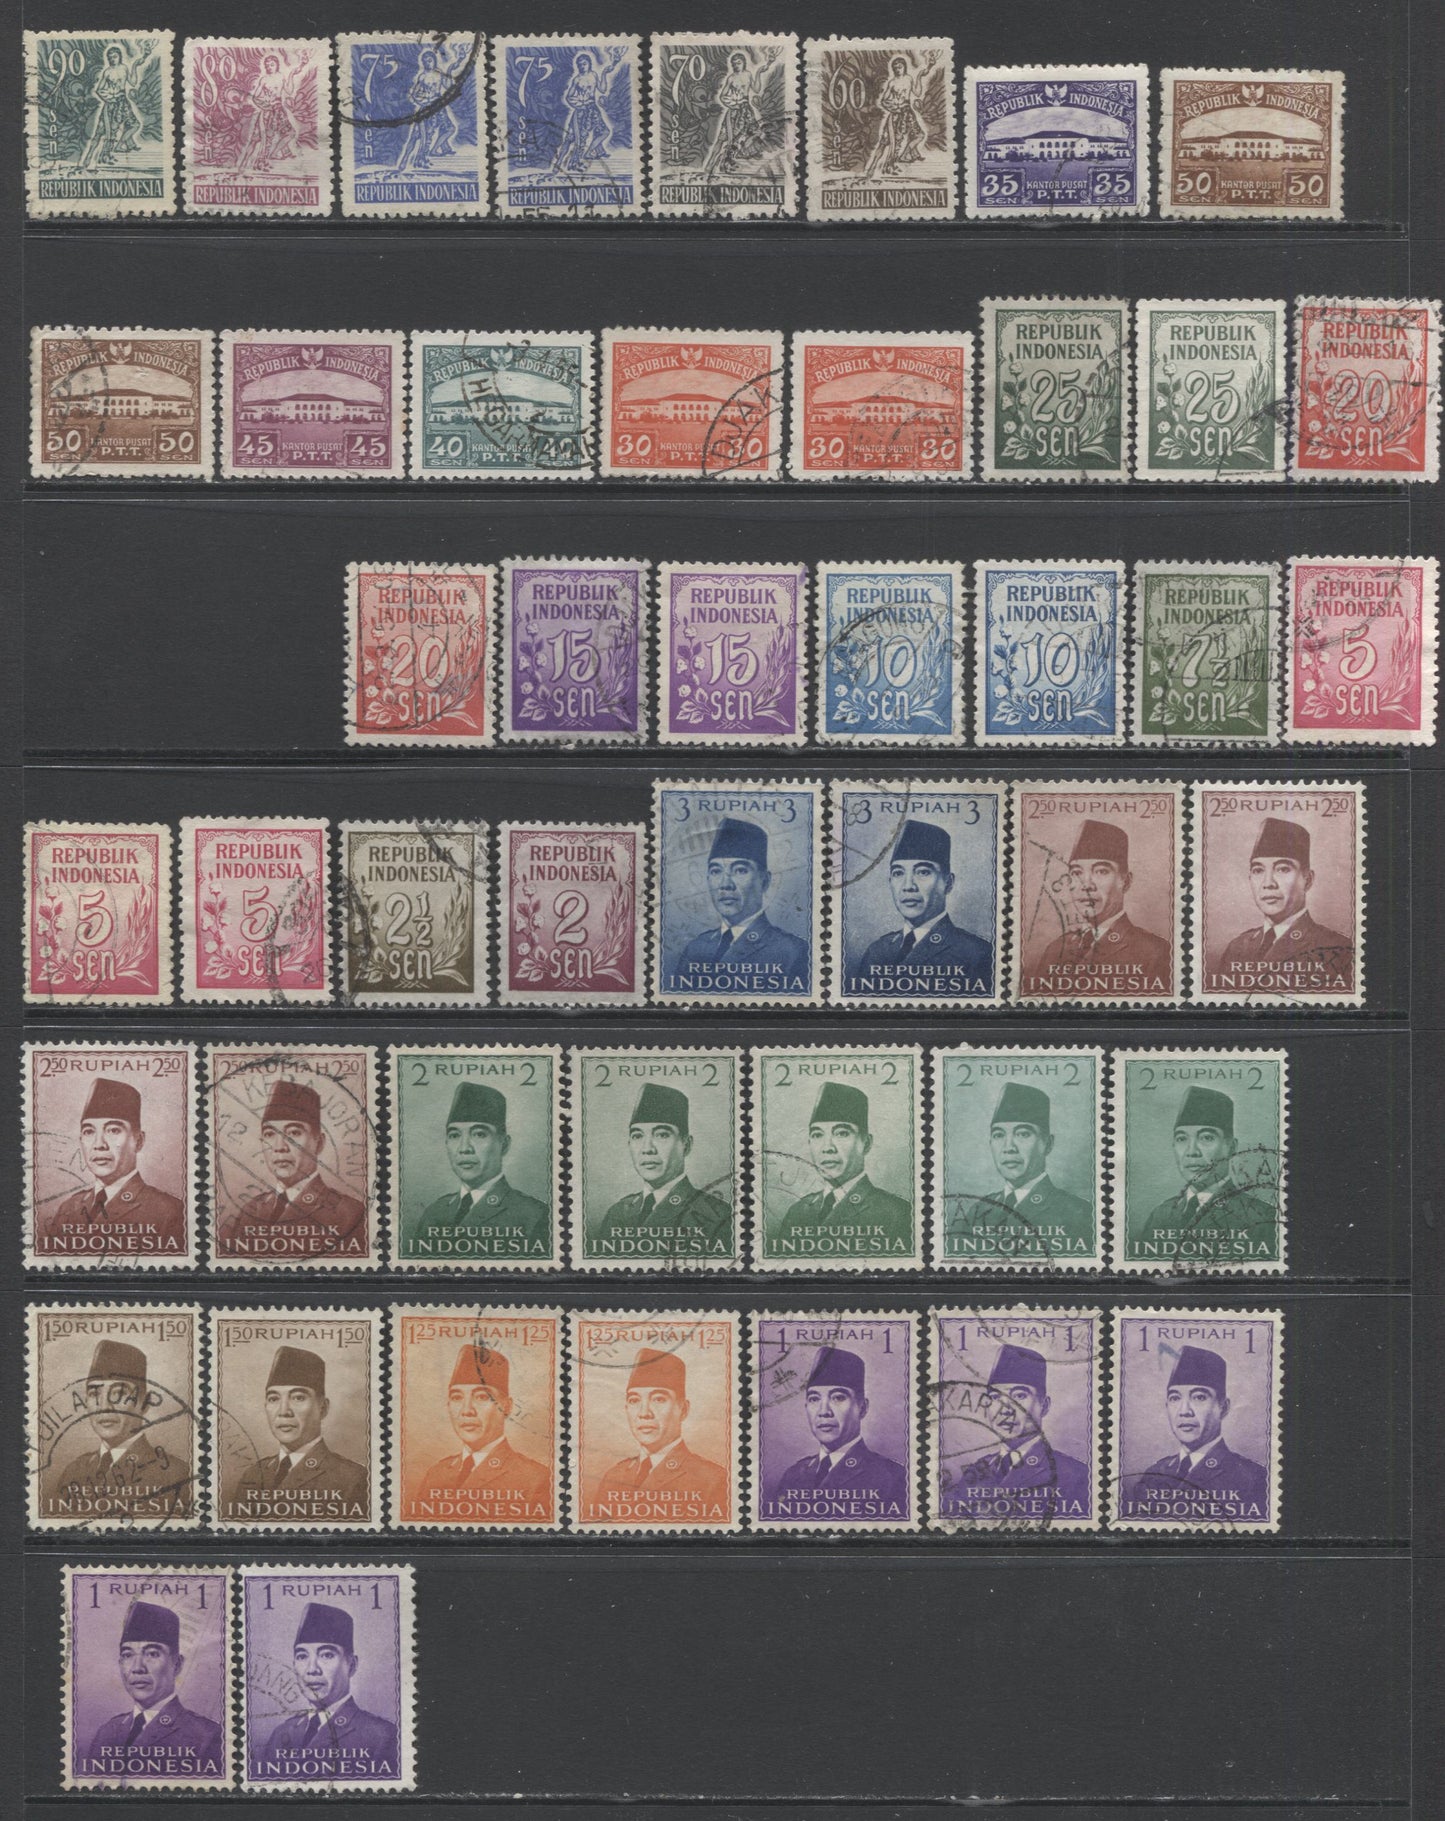 Lot 83 Indonesia SC#368-400 1951-1953 Pictorial & Sukarno Definitives, A F/VF Used Range Of Singles, 2017 Scott Cat. $20.8 USD, Click on Listing to See ALL Pictures